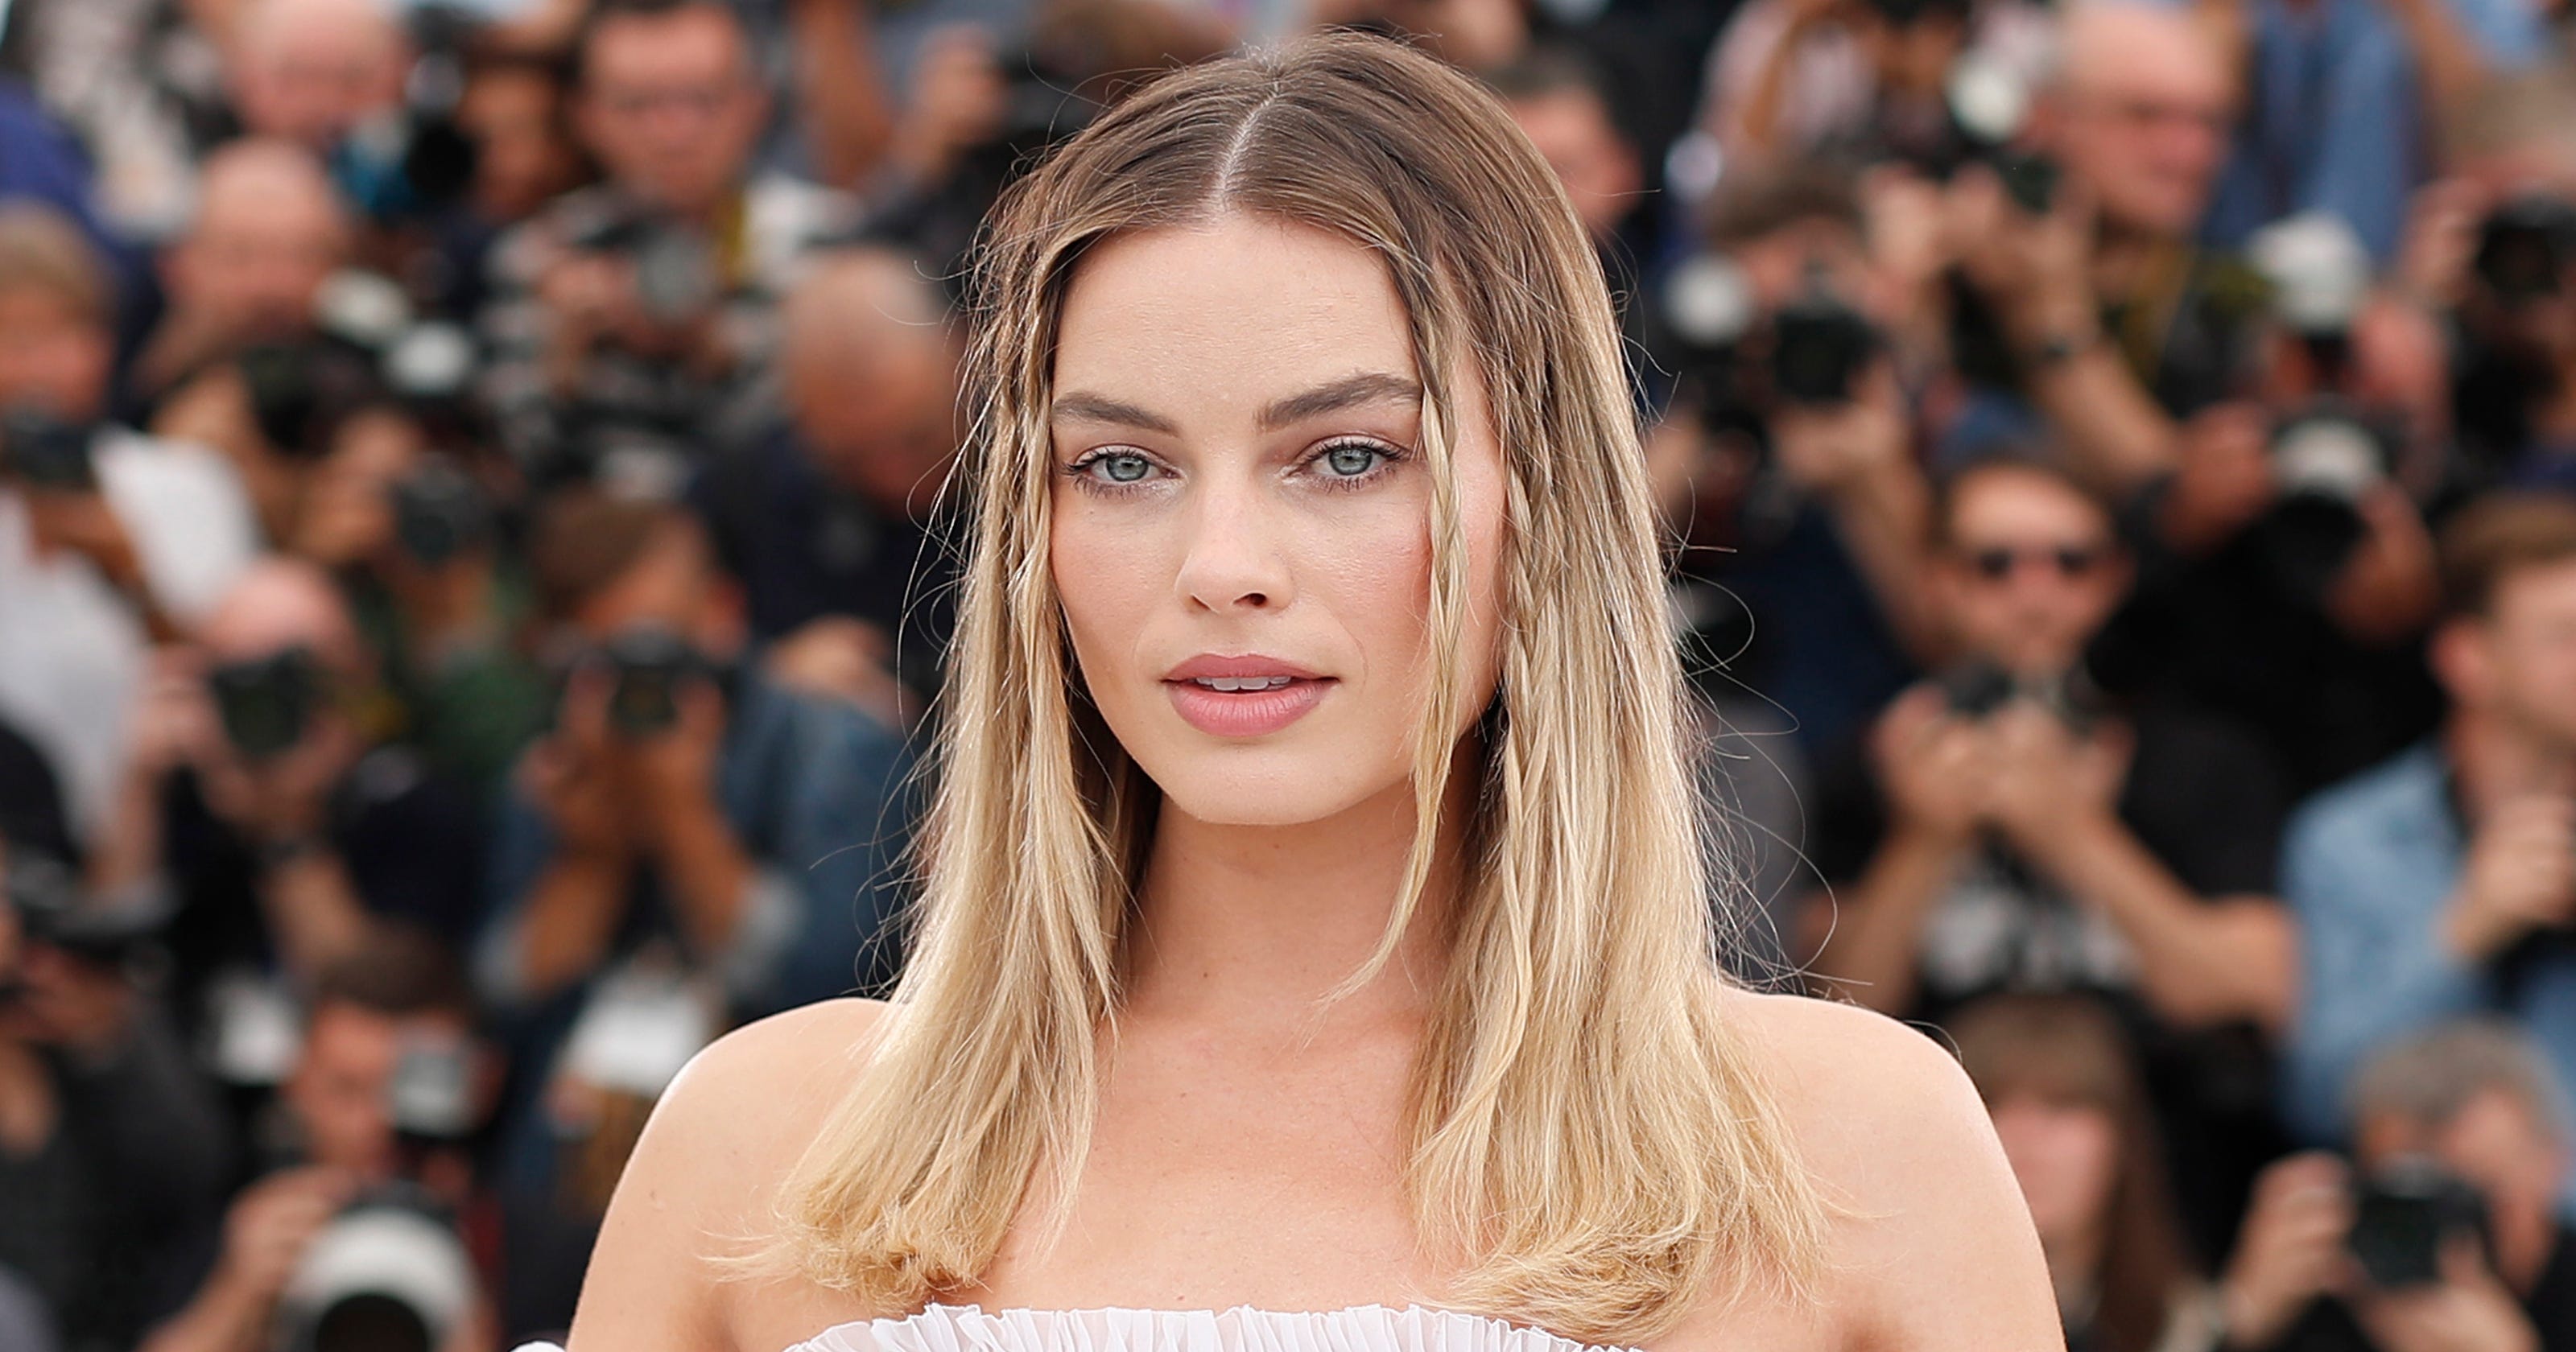 Margot Robbie 'hates it so much' when people call her a 'bombshell'